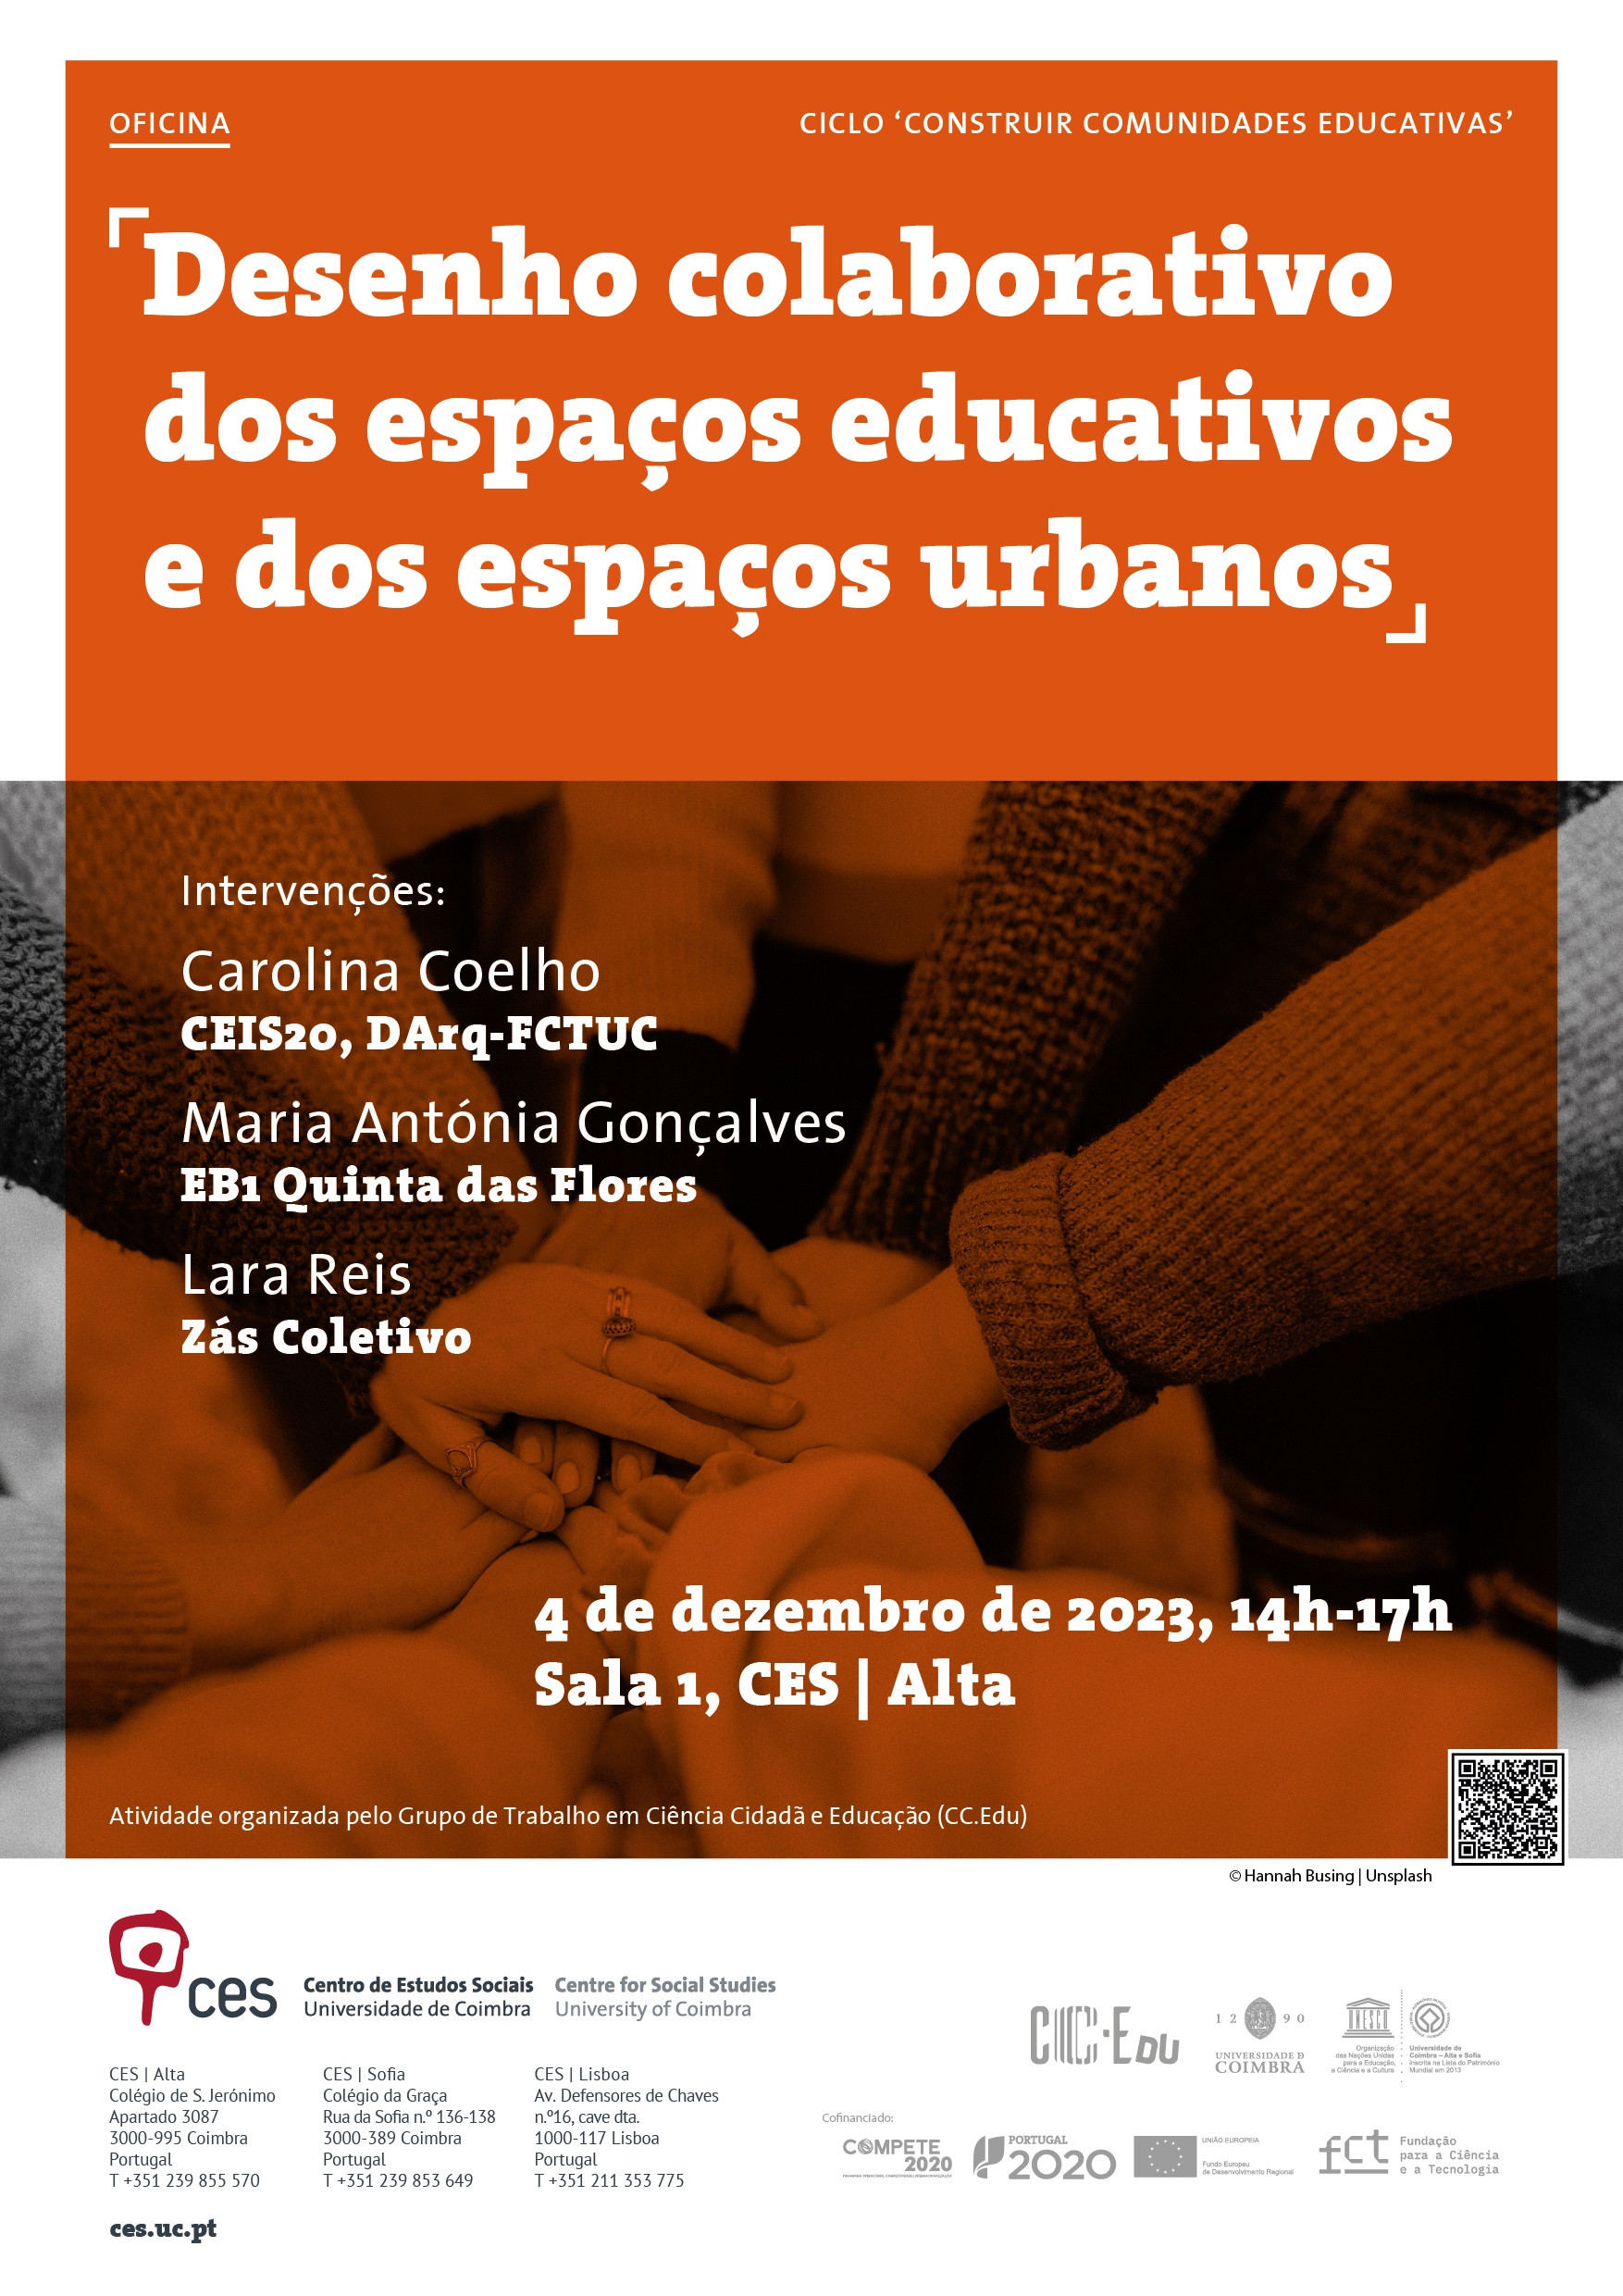 Collaborative design of educational and urban spaces <span id="edit_43763"><script>$(function() { $('#edit_43763').load( "/myces/user/editobj.php?tipo=evento&id=43763" ); });</script></span>